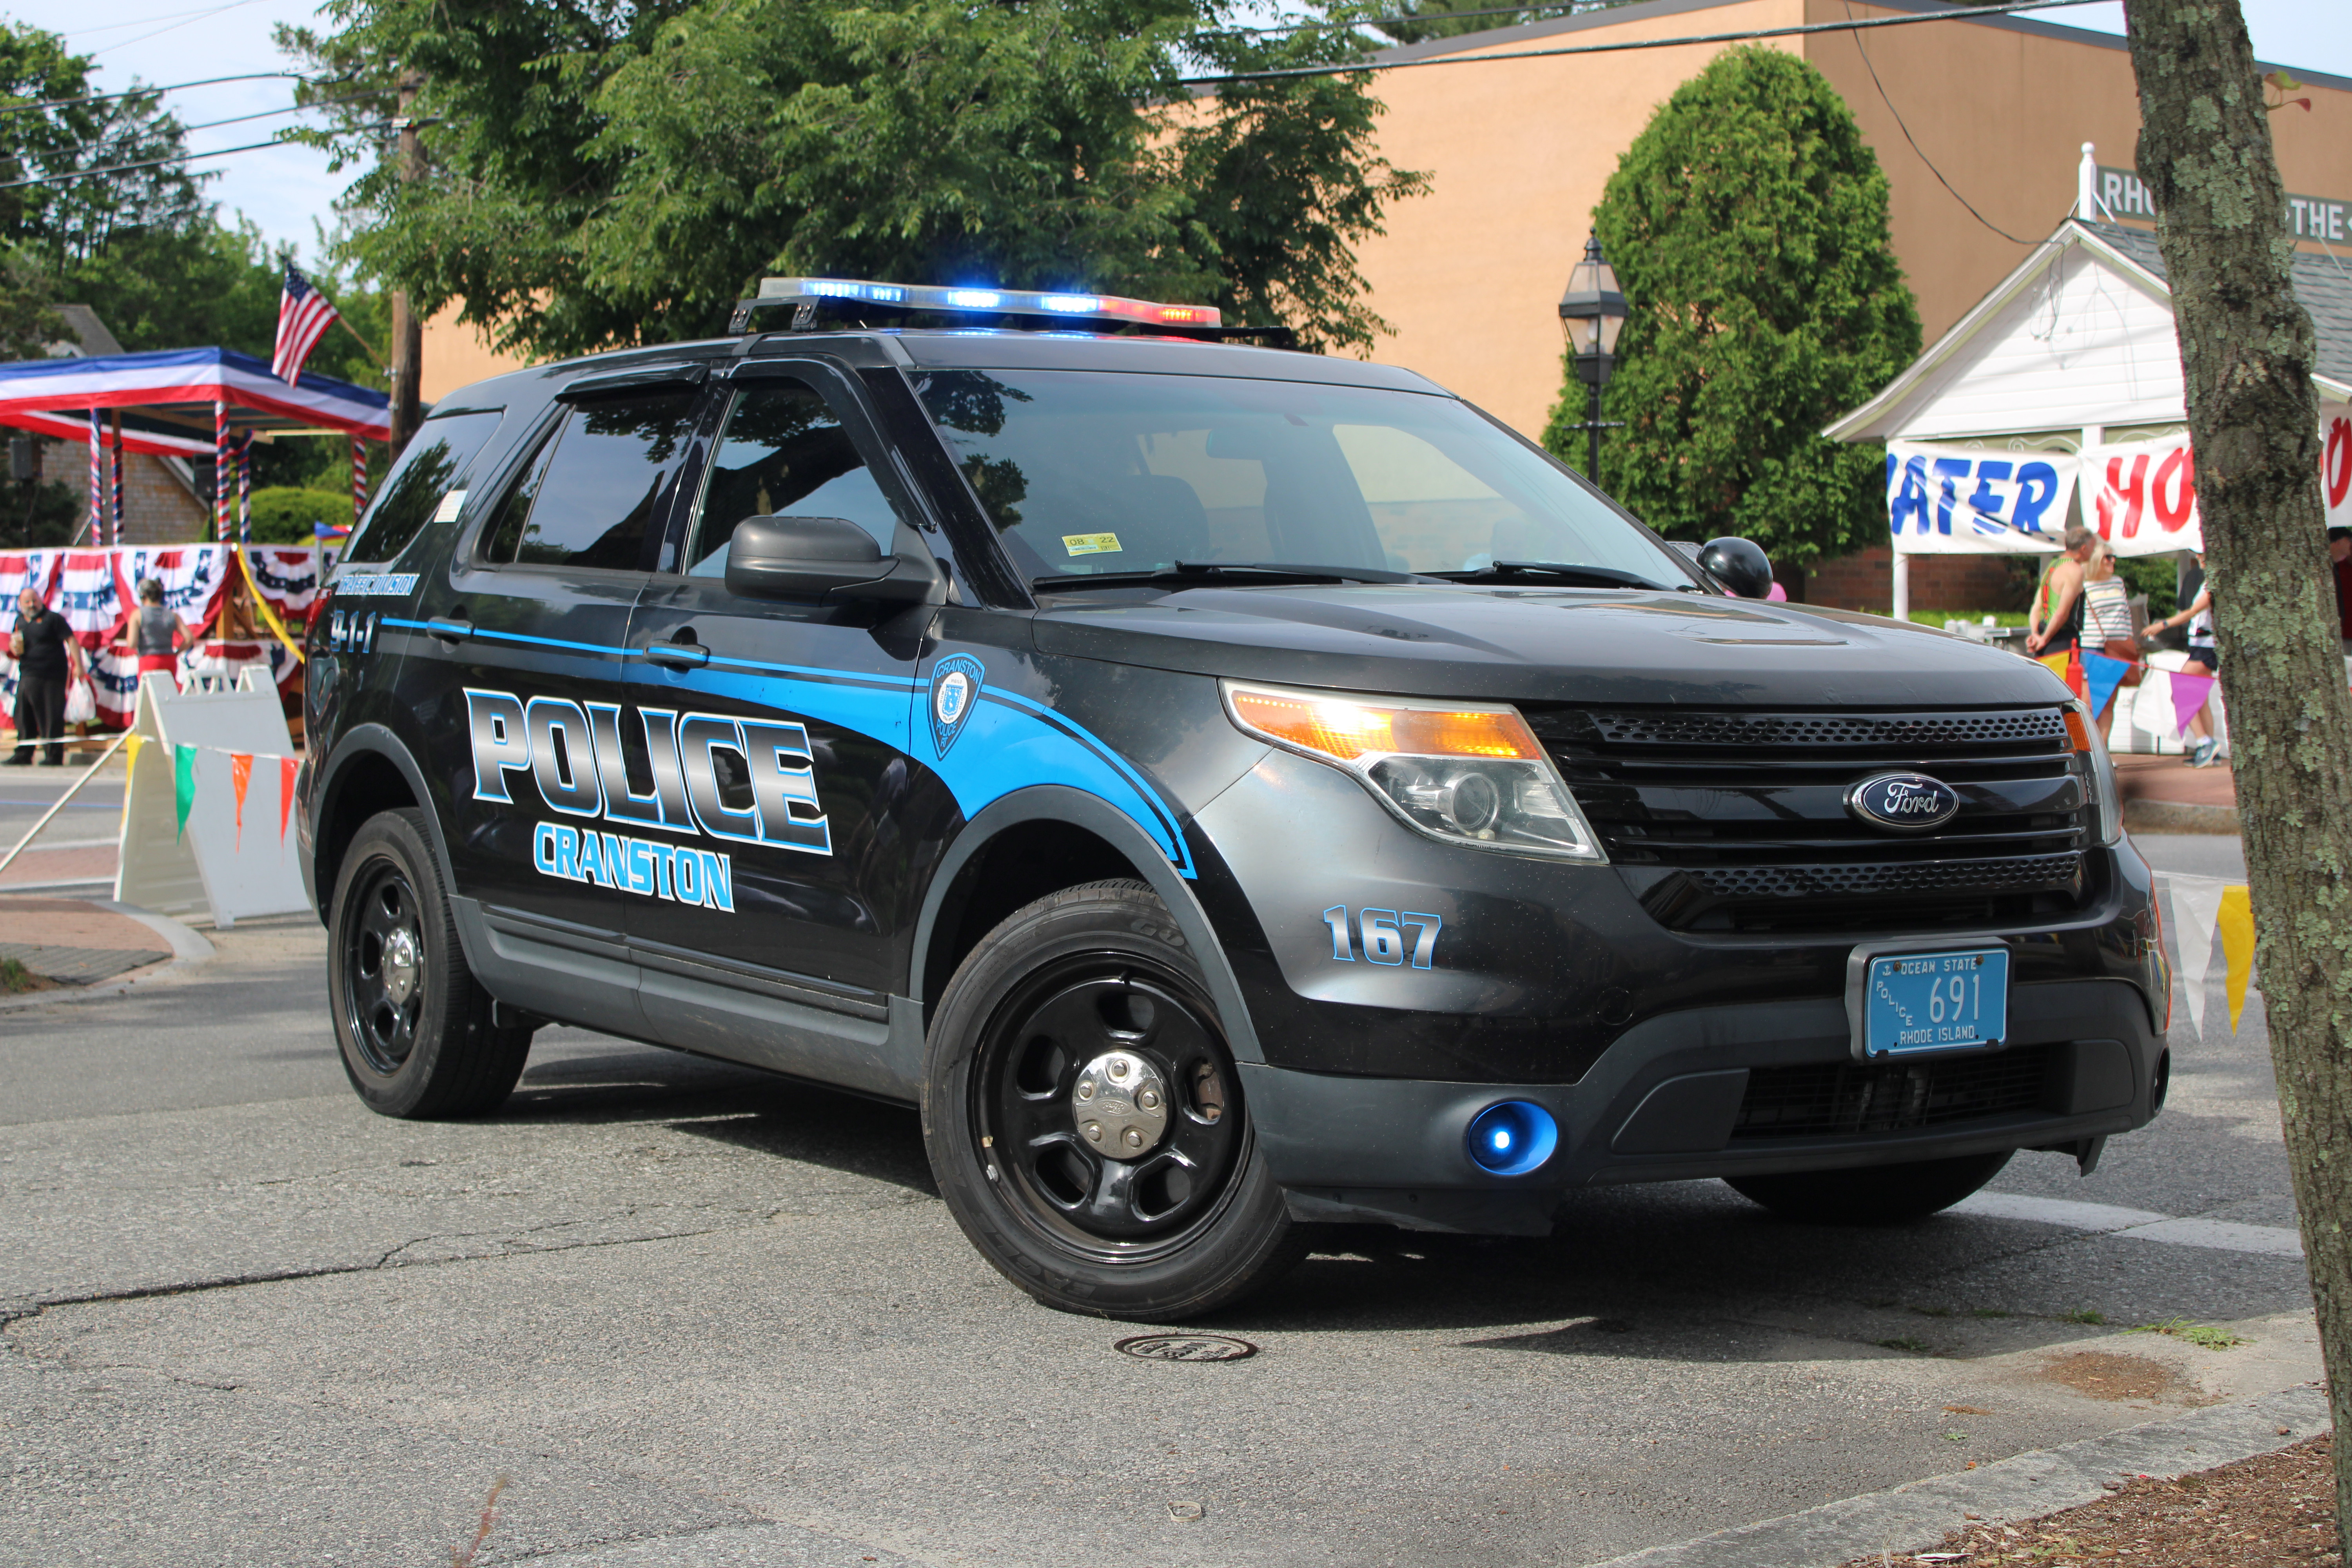 A photo  of Cranston Police
            Cruiser 167, a 2013 Ford Police Interceptor Utility             taken by @riemergencyvehicles